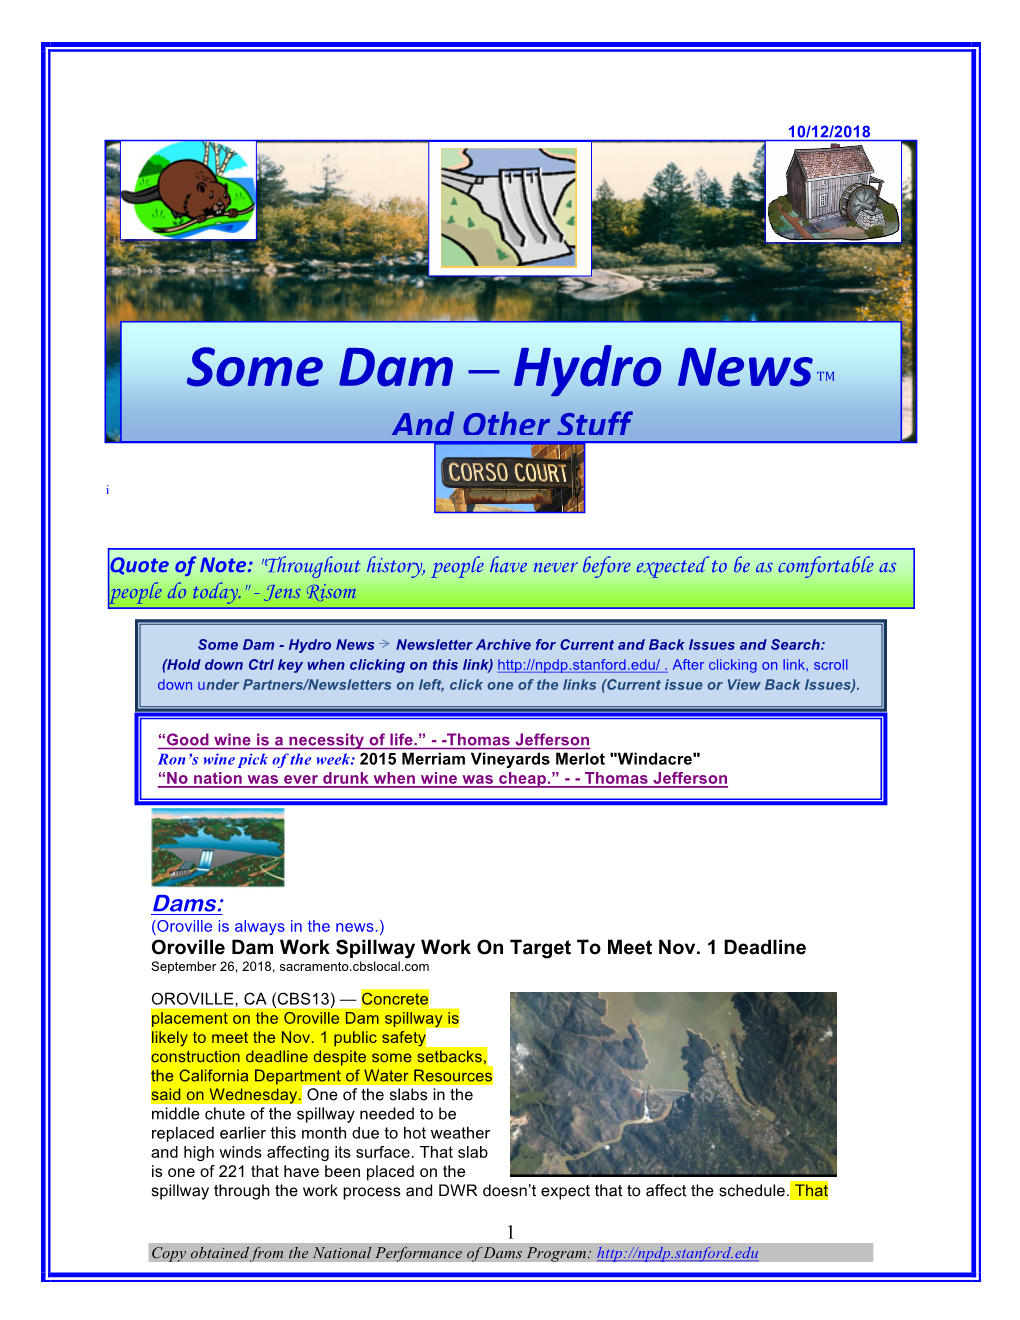 Some Dam – Hydro News TM and Other Stuff